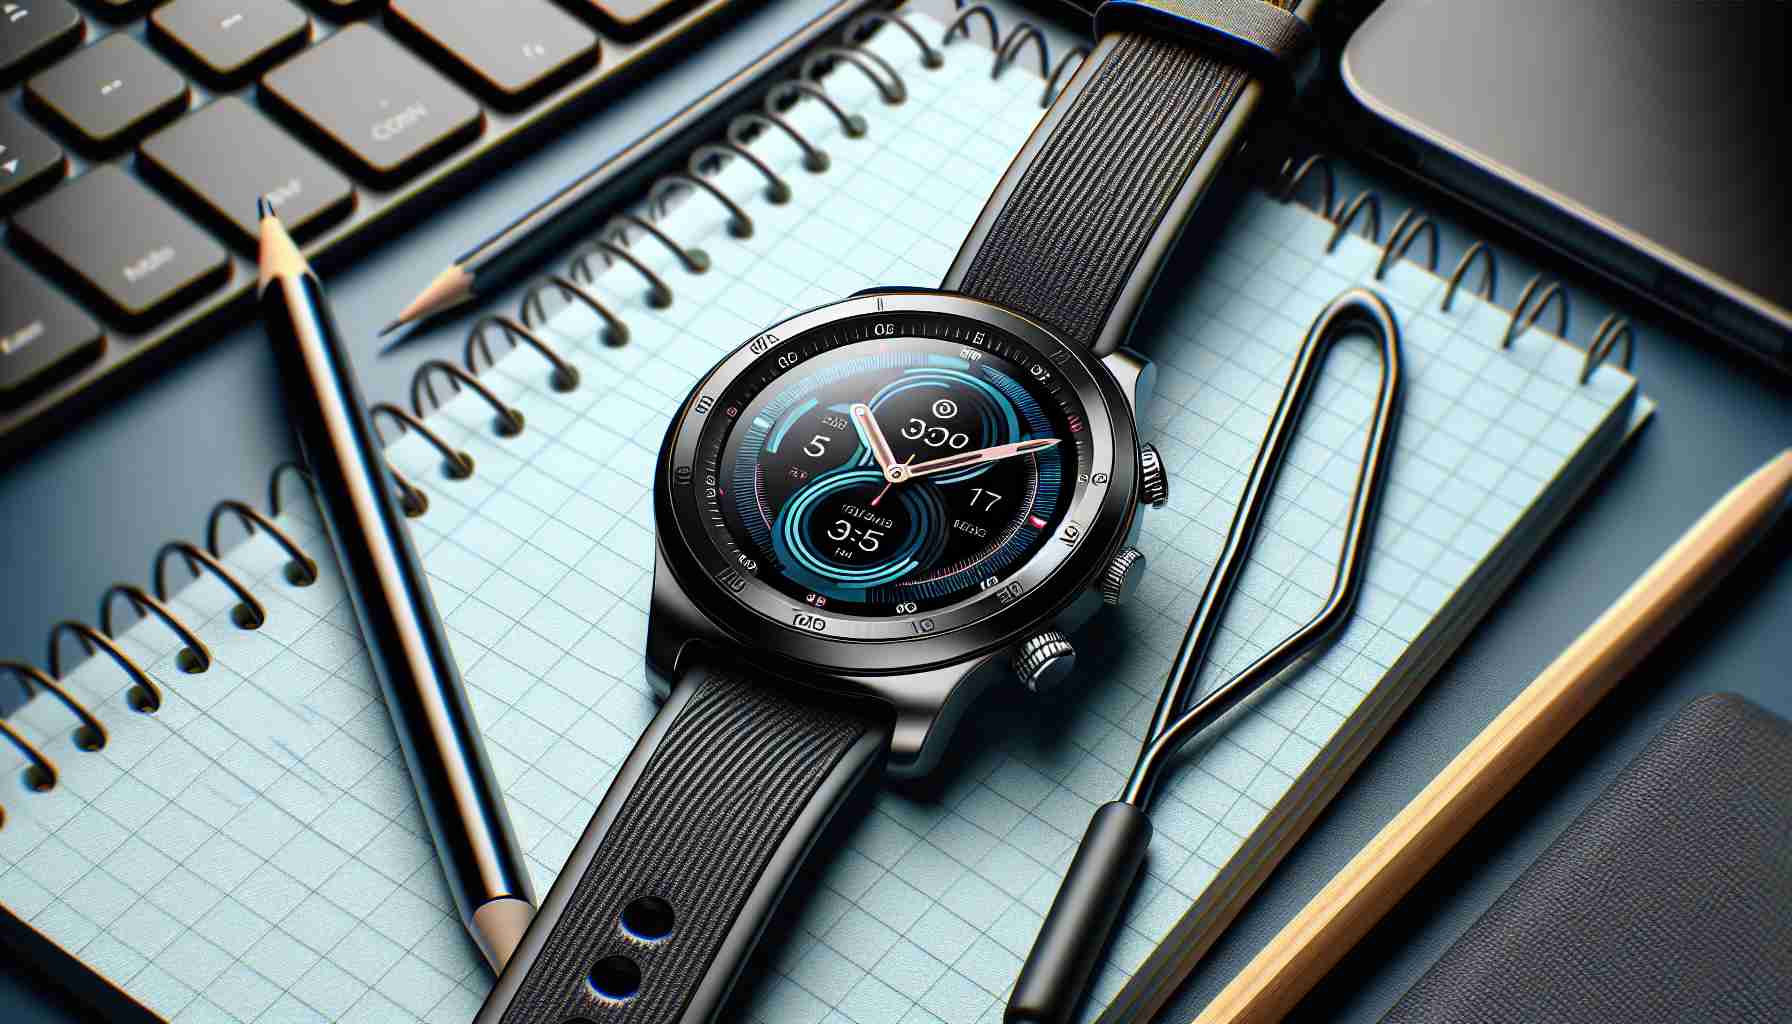 NoiseFit Twist Go Smartwatch: A Perfect Blend of Style and Functionality